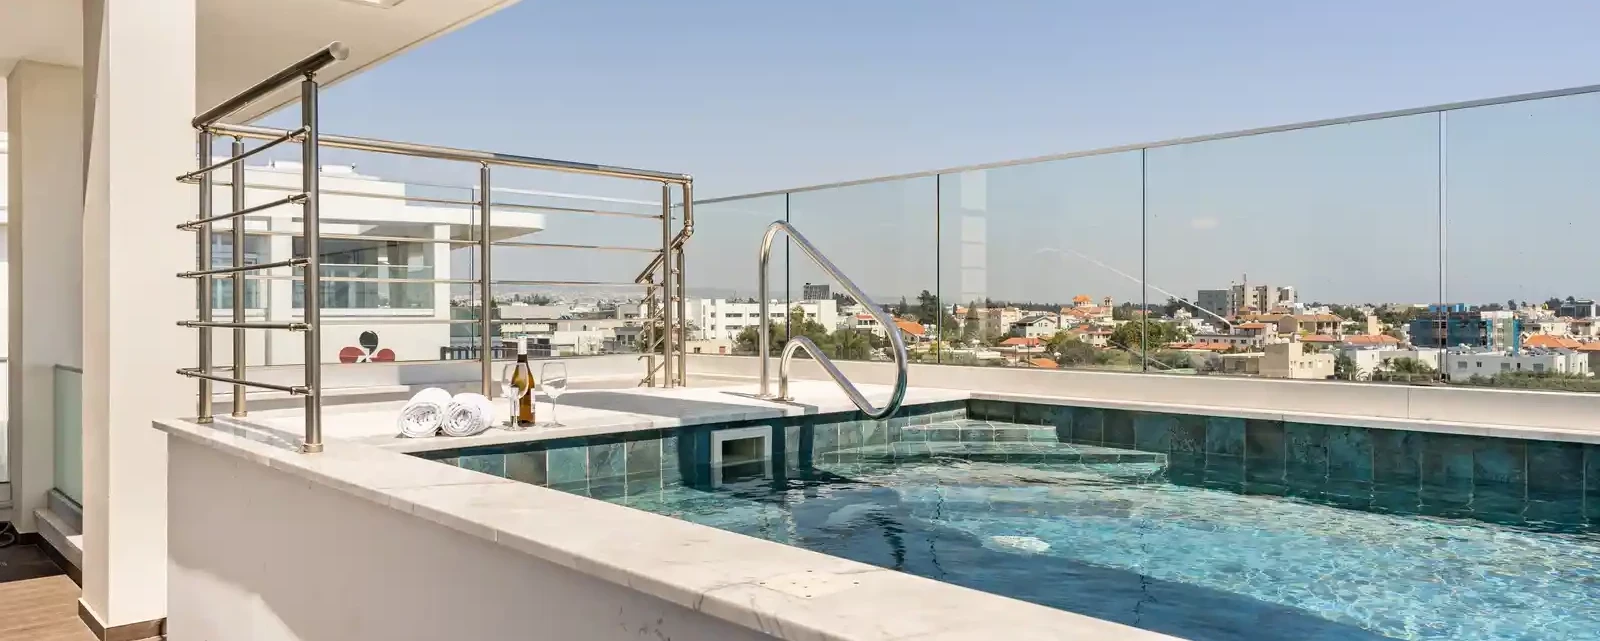 3-bedroom penthouse to rent €4.150, image 1